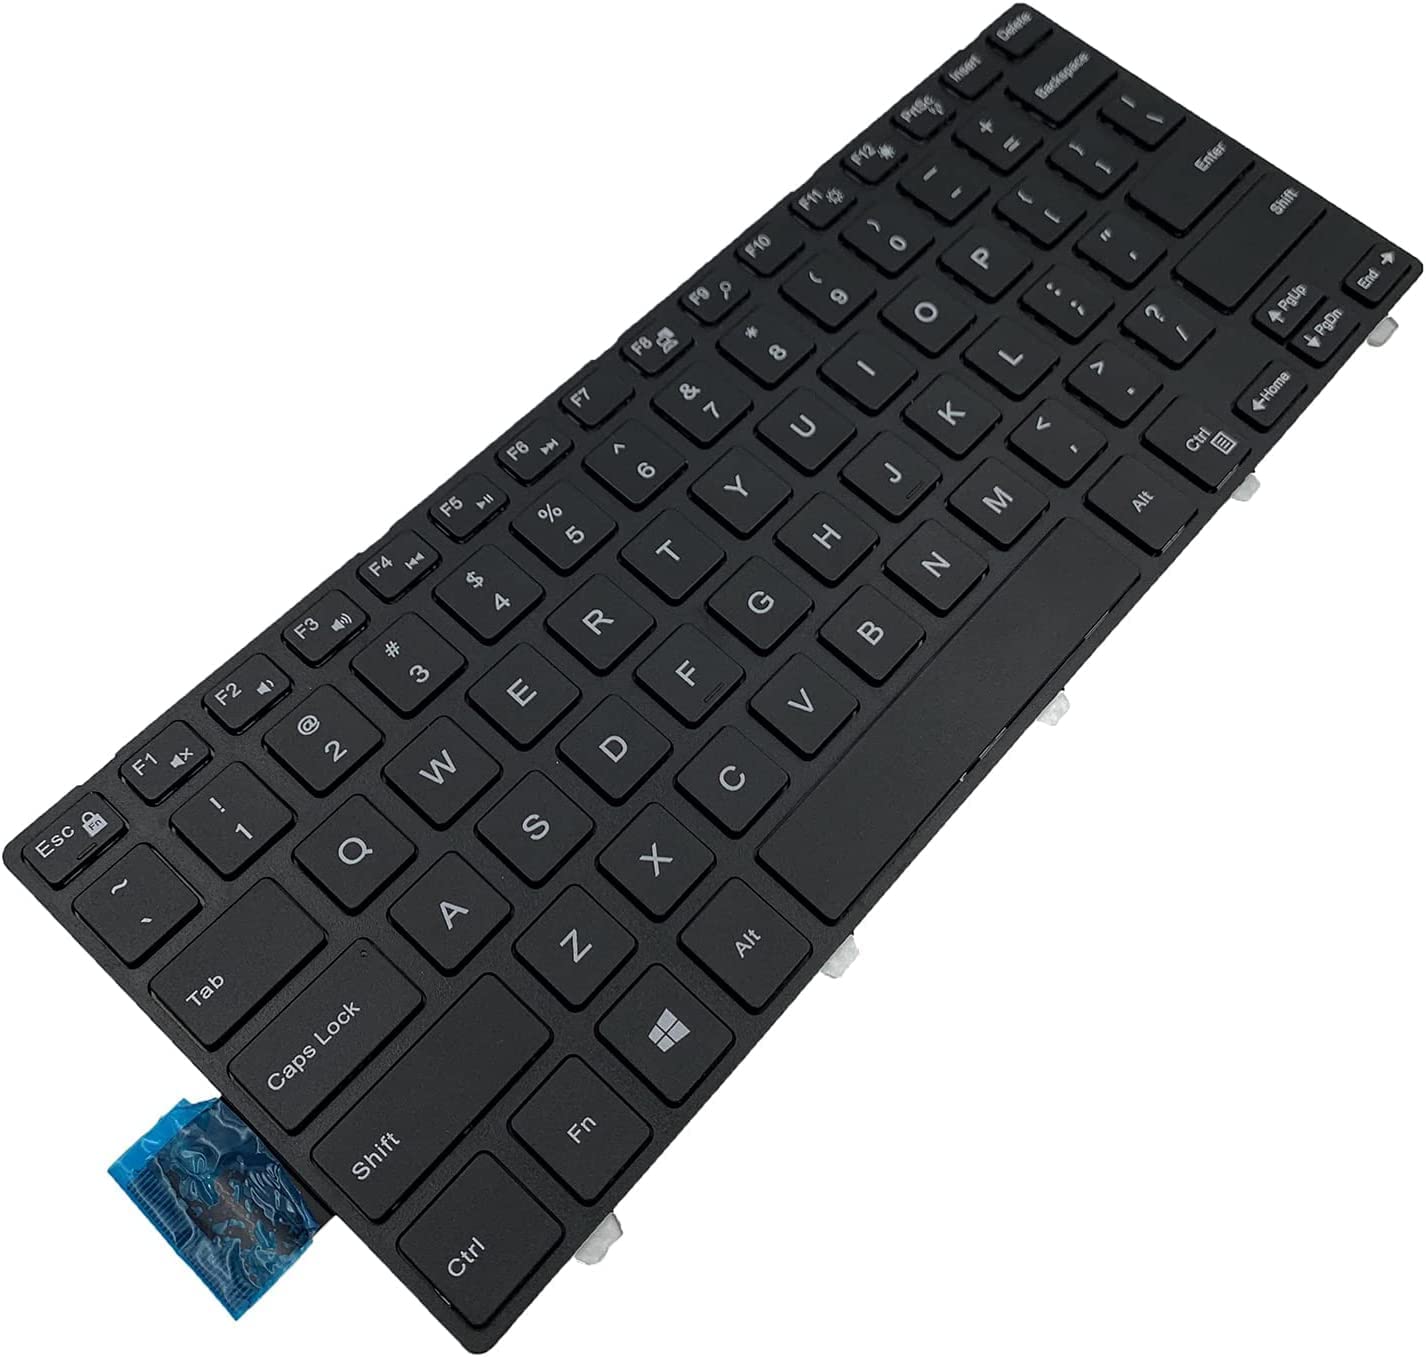 WISTAR Laptop Keyboard Compatible for Dell Vostro 3446 Inspiron 14 3000 Series 3441 3442 3443 3445 3447 3449 3451 3458 3459 P/N 06XWMR